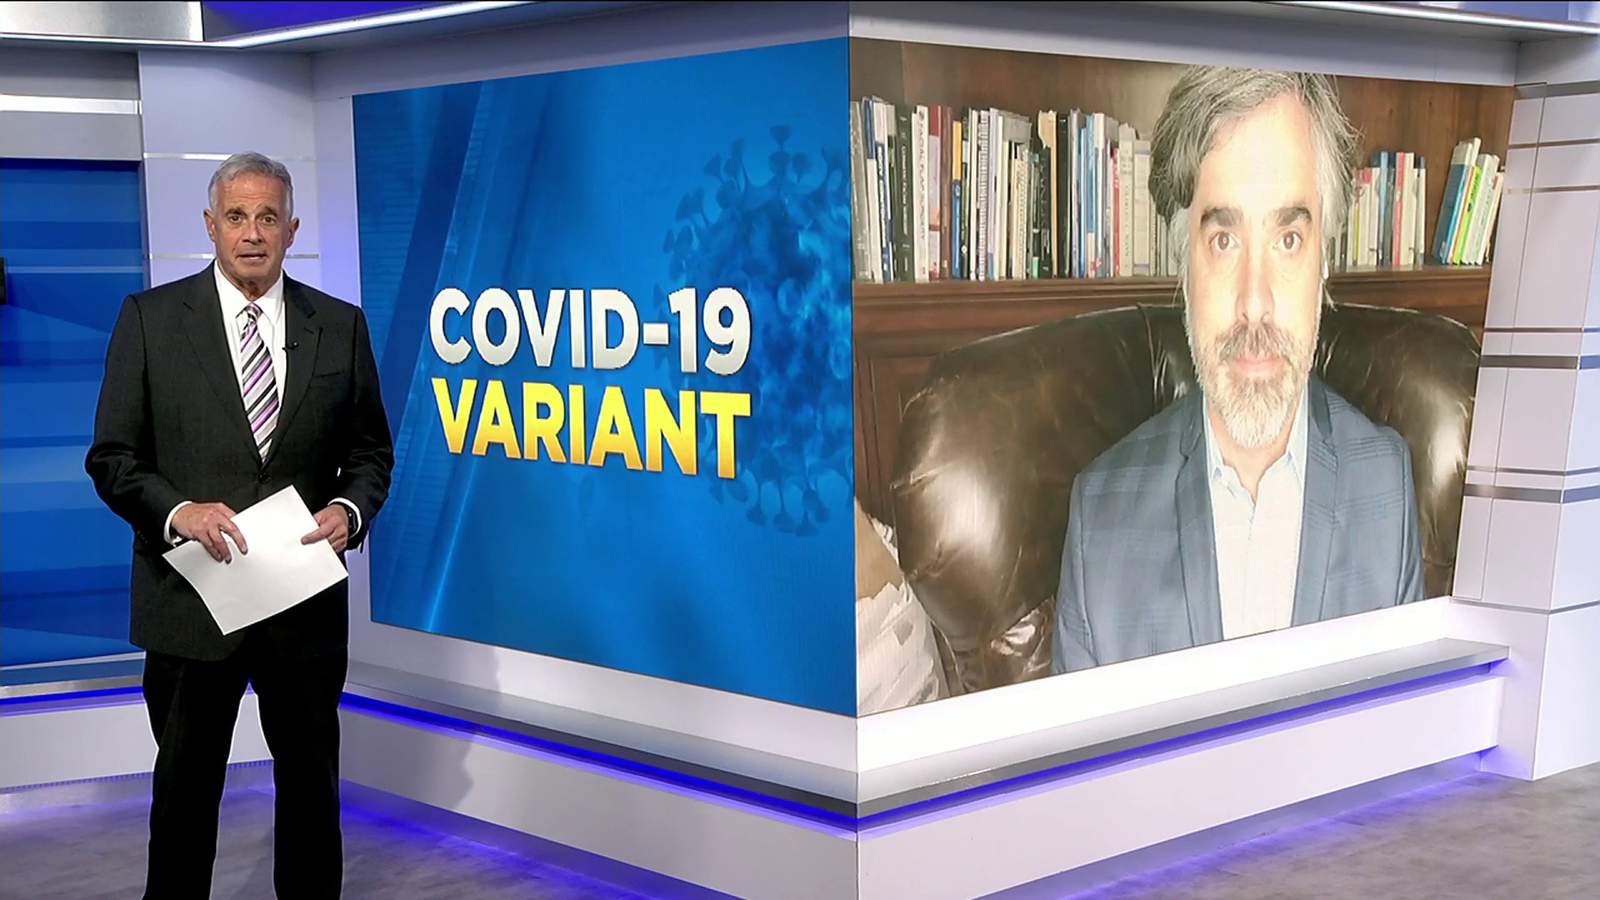 Epidemiologist breaks down concerns about COVID-19 variants